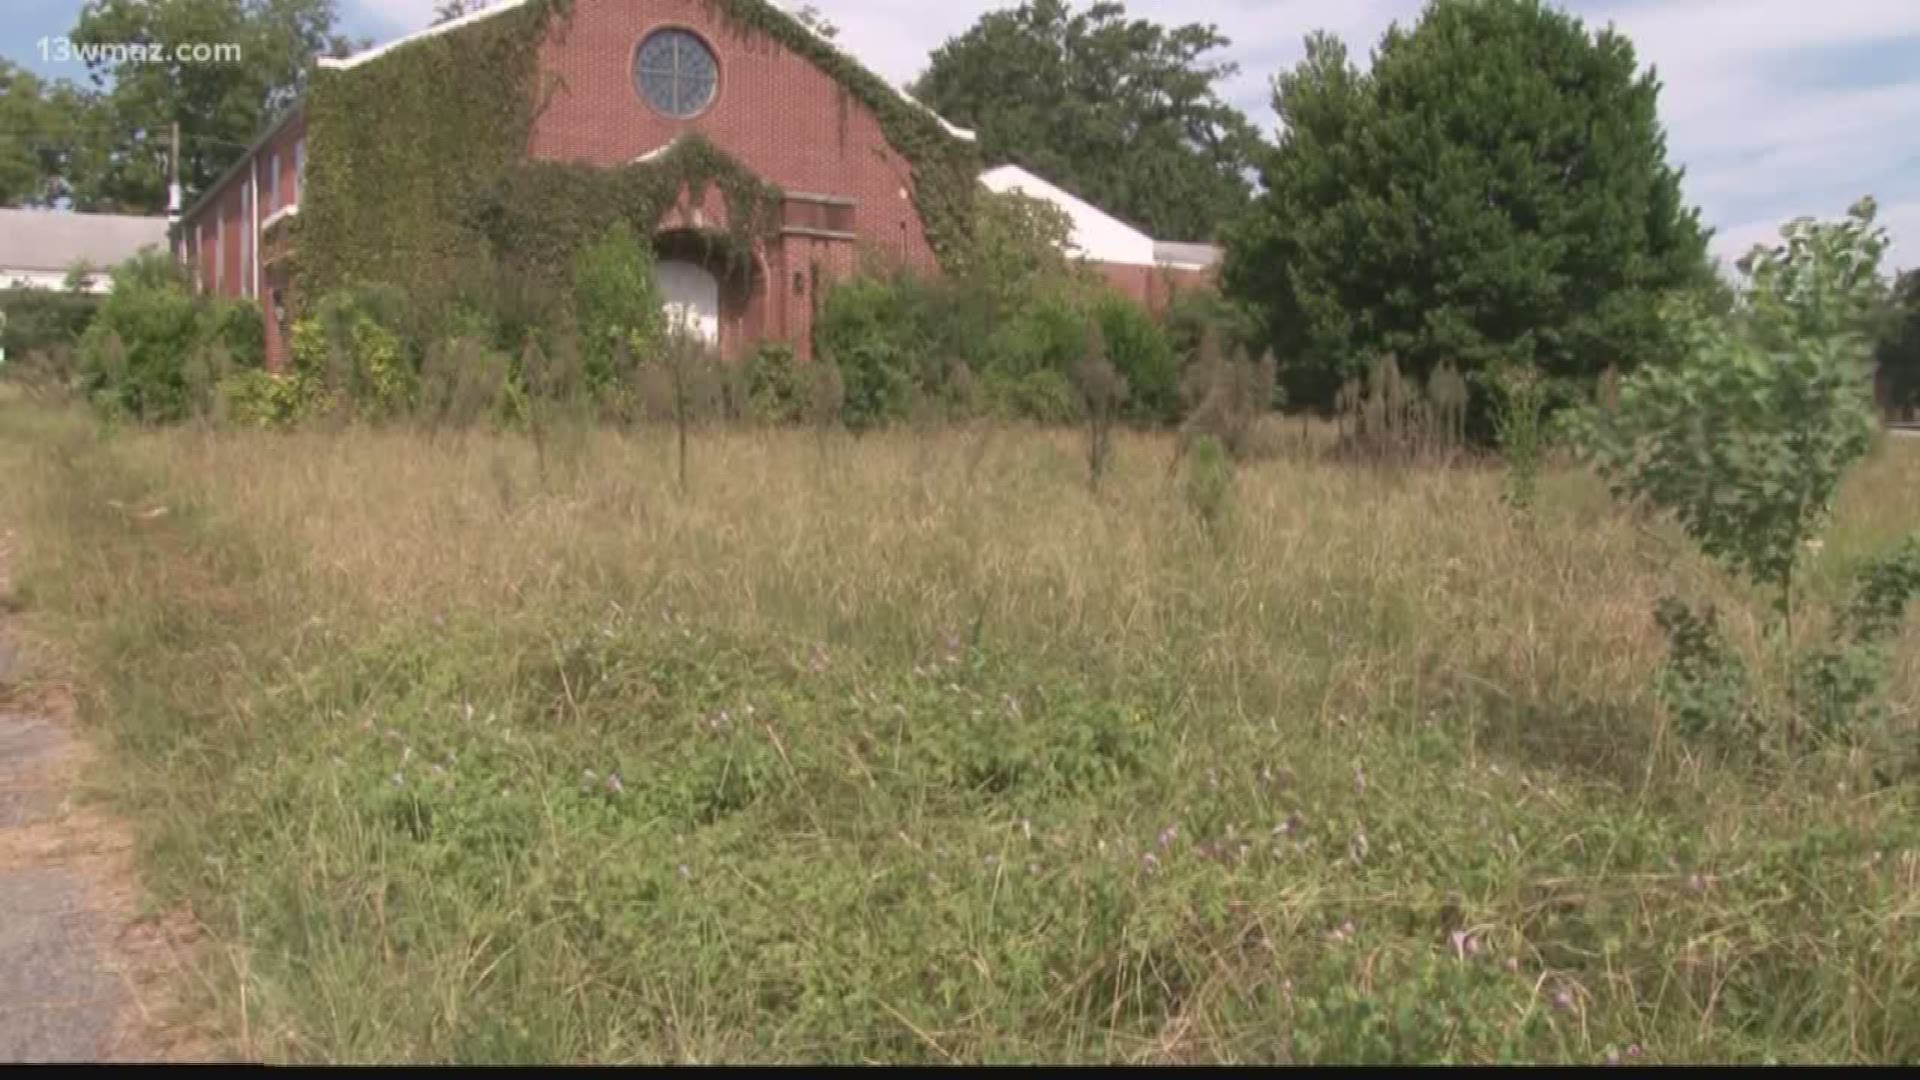 Neighbors says they're frustrated because a once-beautiful church is now a place for drug deals and vandals and the property owner will not return their calls.